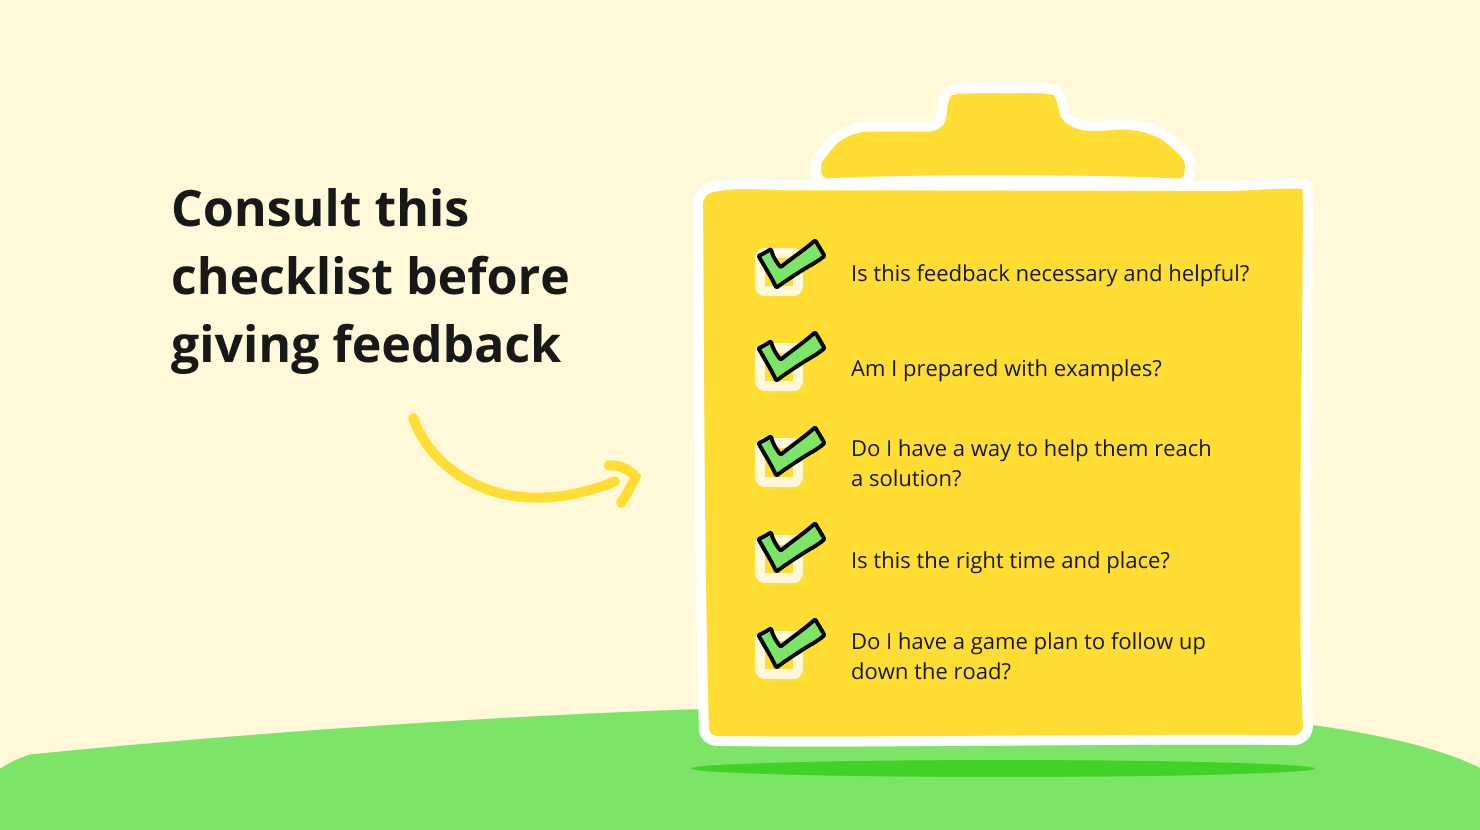 Consult_this_checklist_before_giving_feedback_(1)